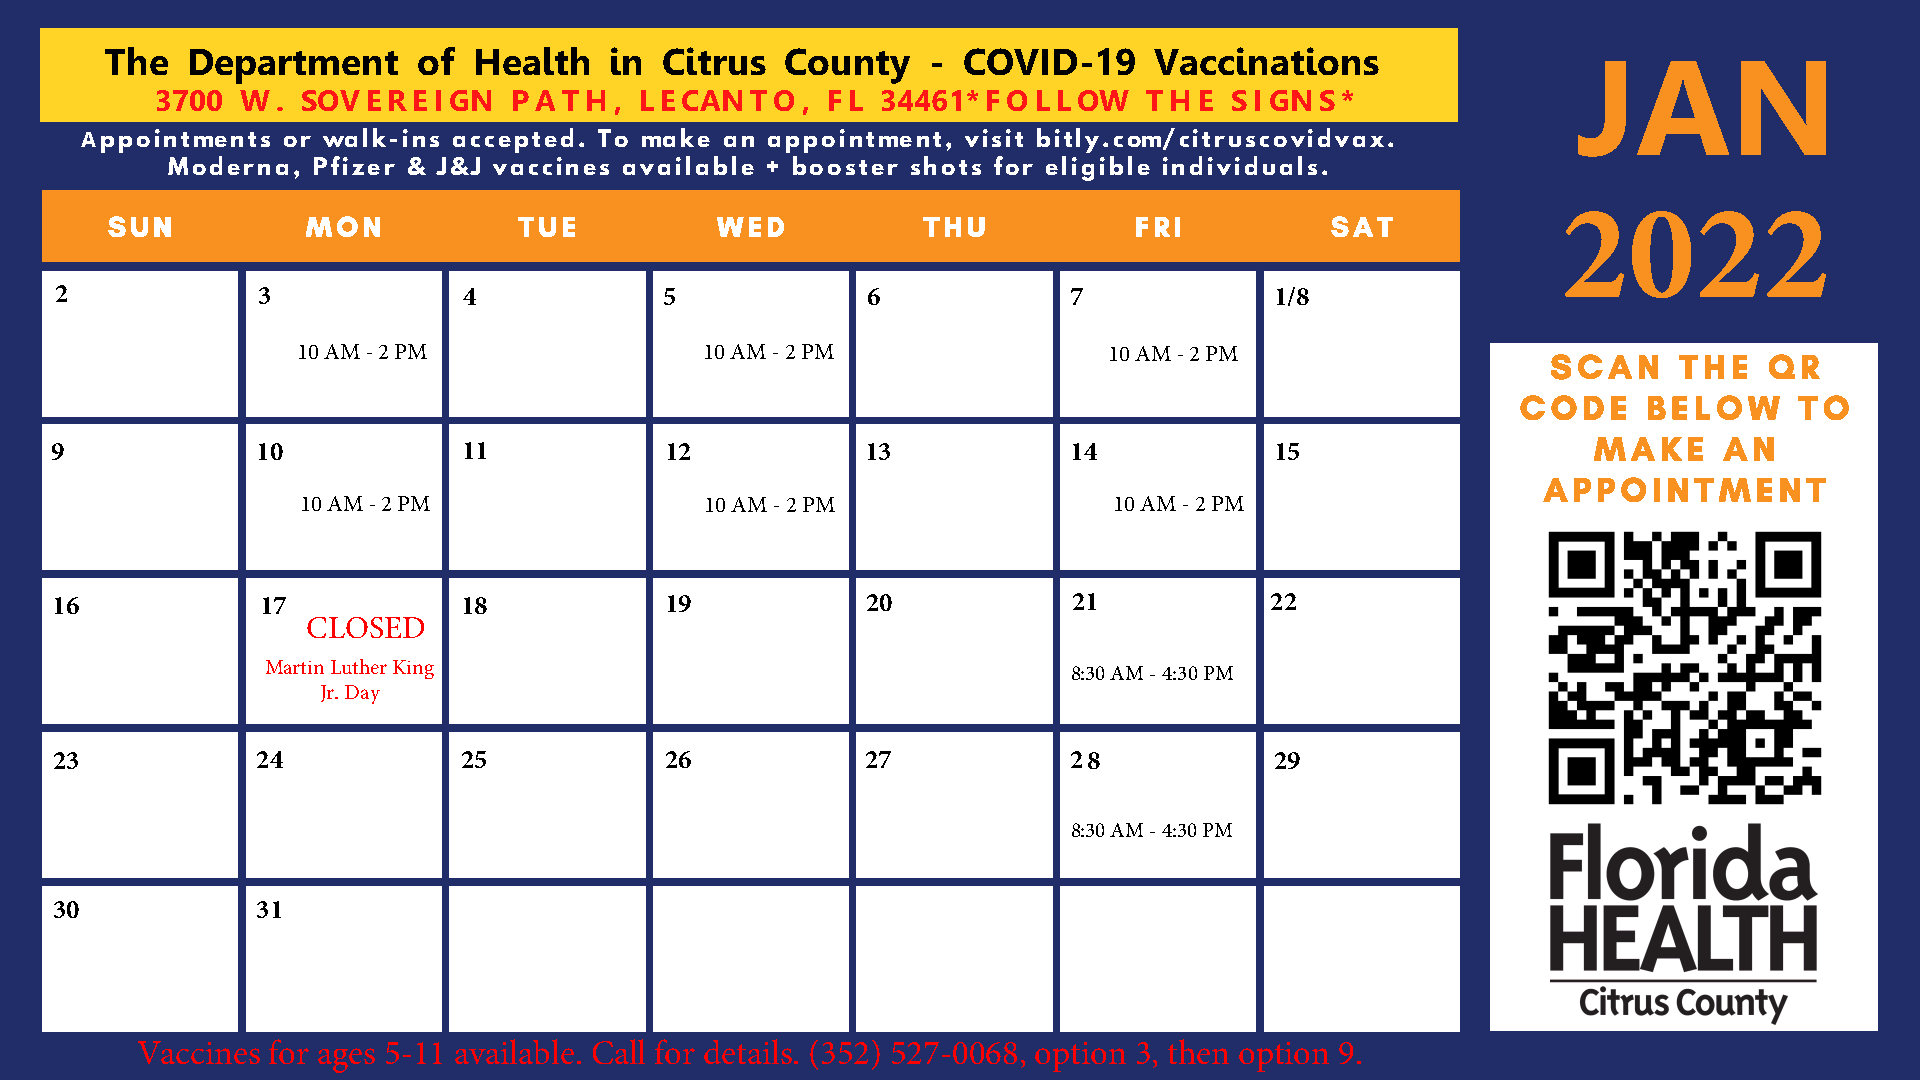 JANUARY VACCINATION SCHEDULE